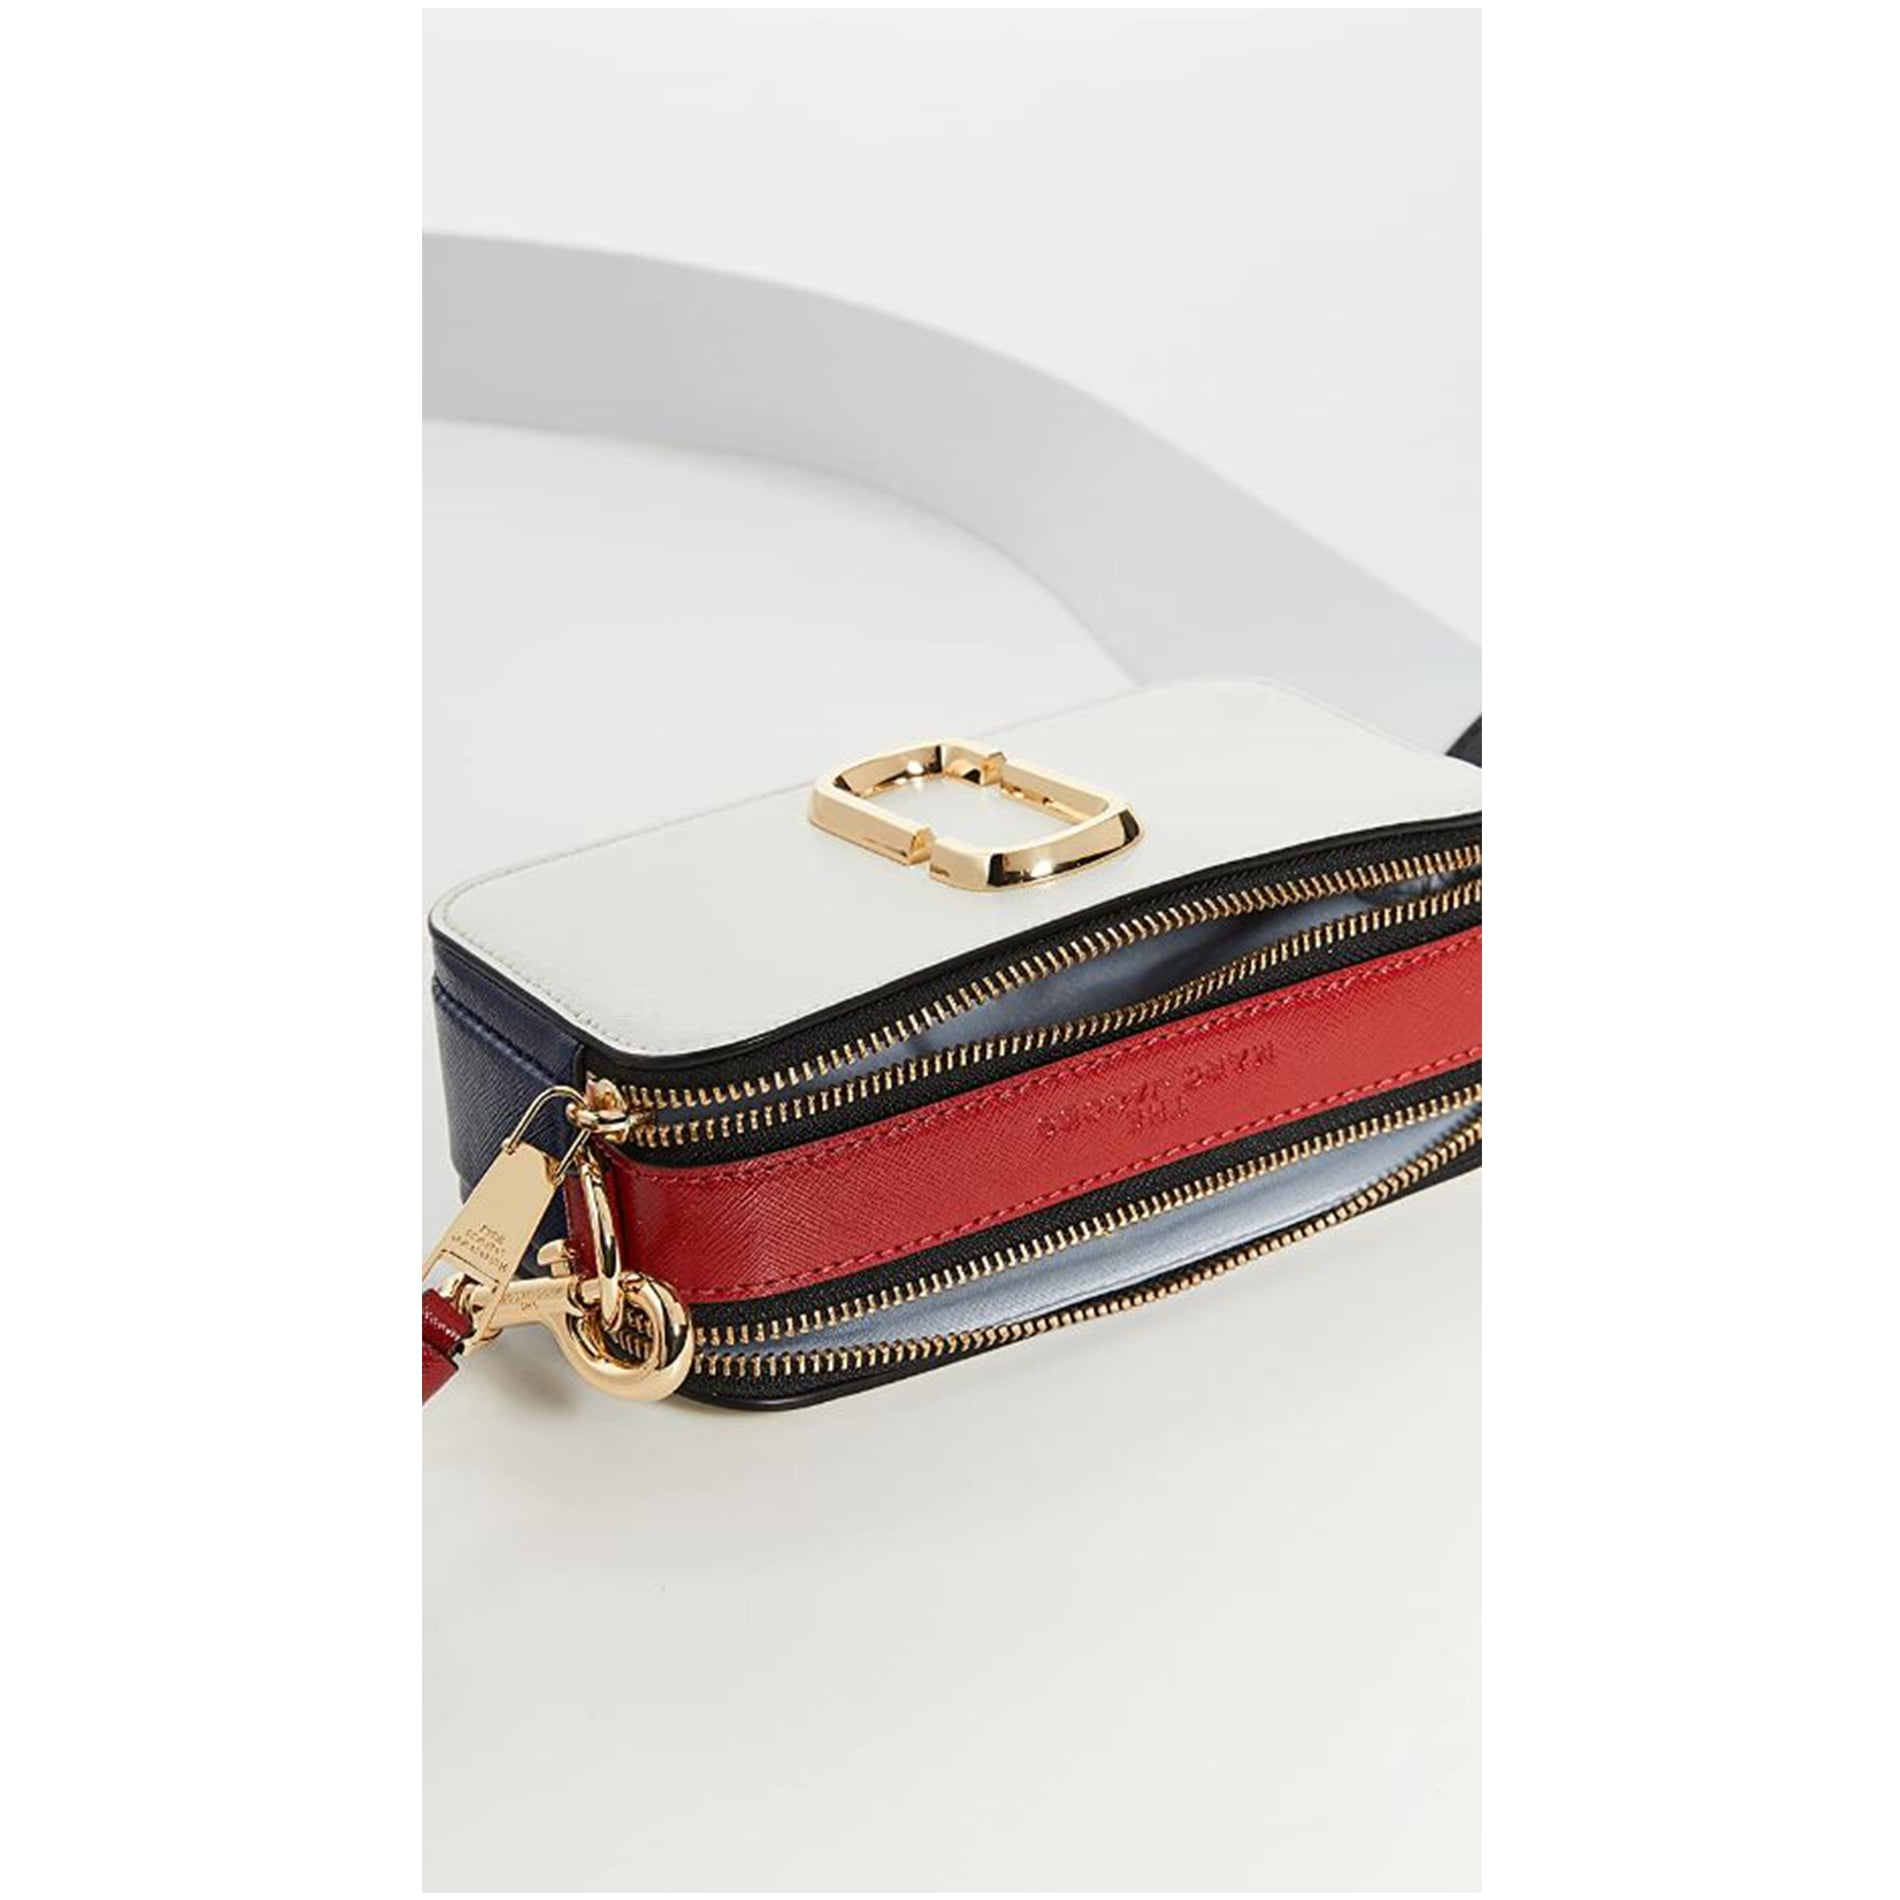 Marc Jacobs The Snapshot Crossbody Bag - Candy Pink/Multi • Price »